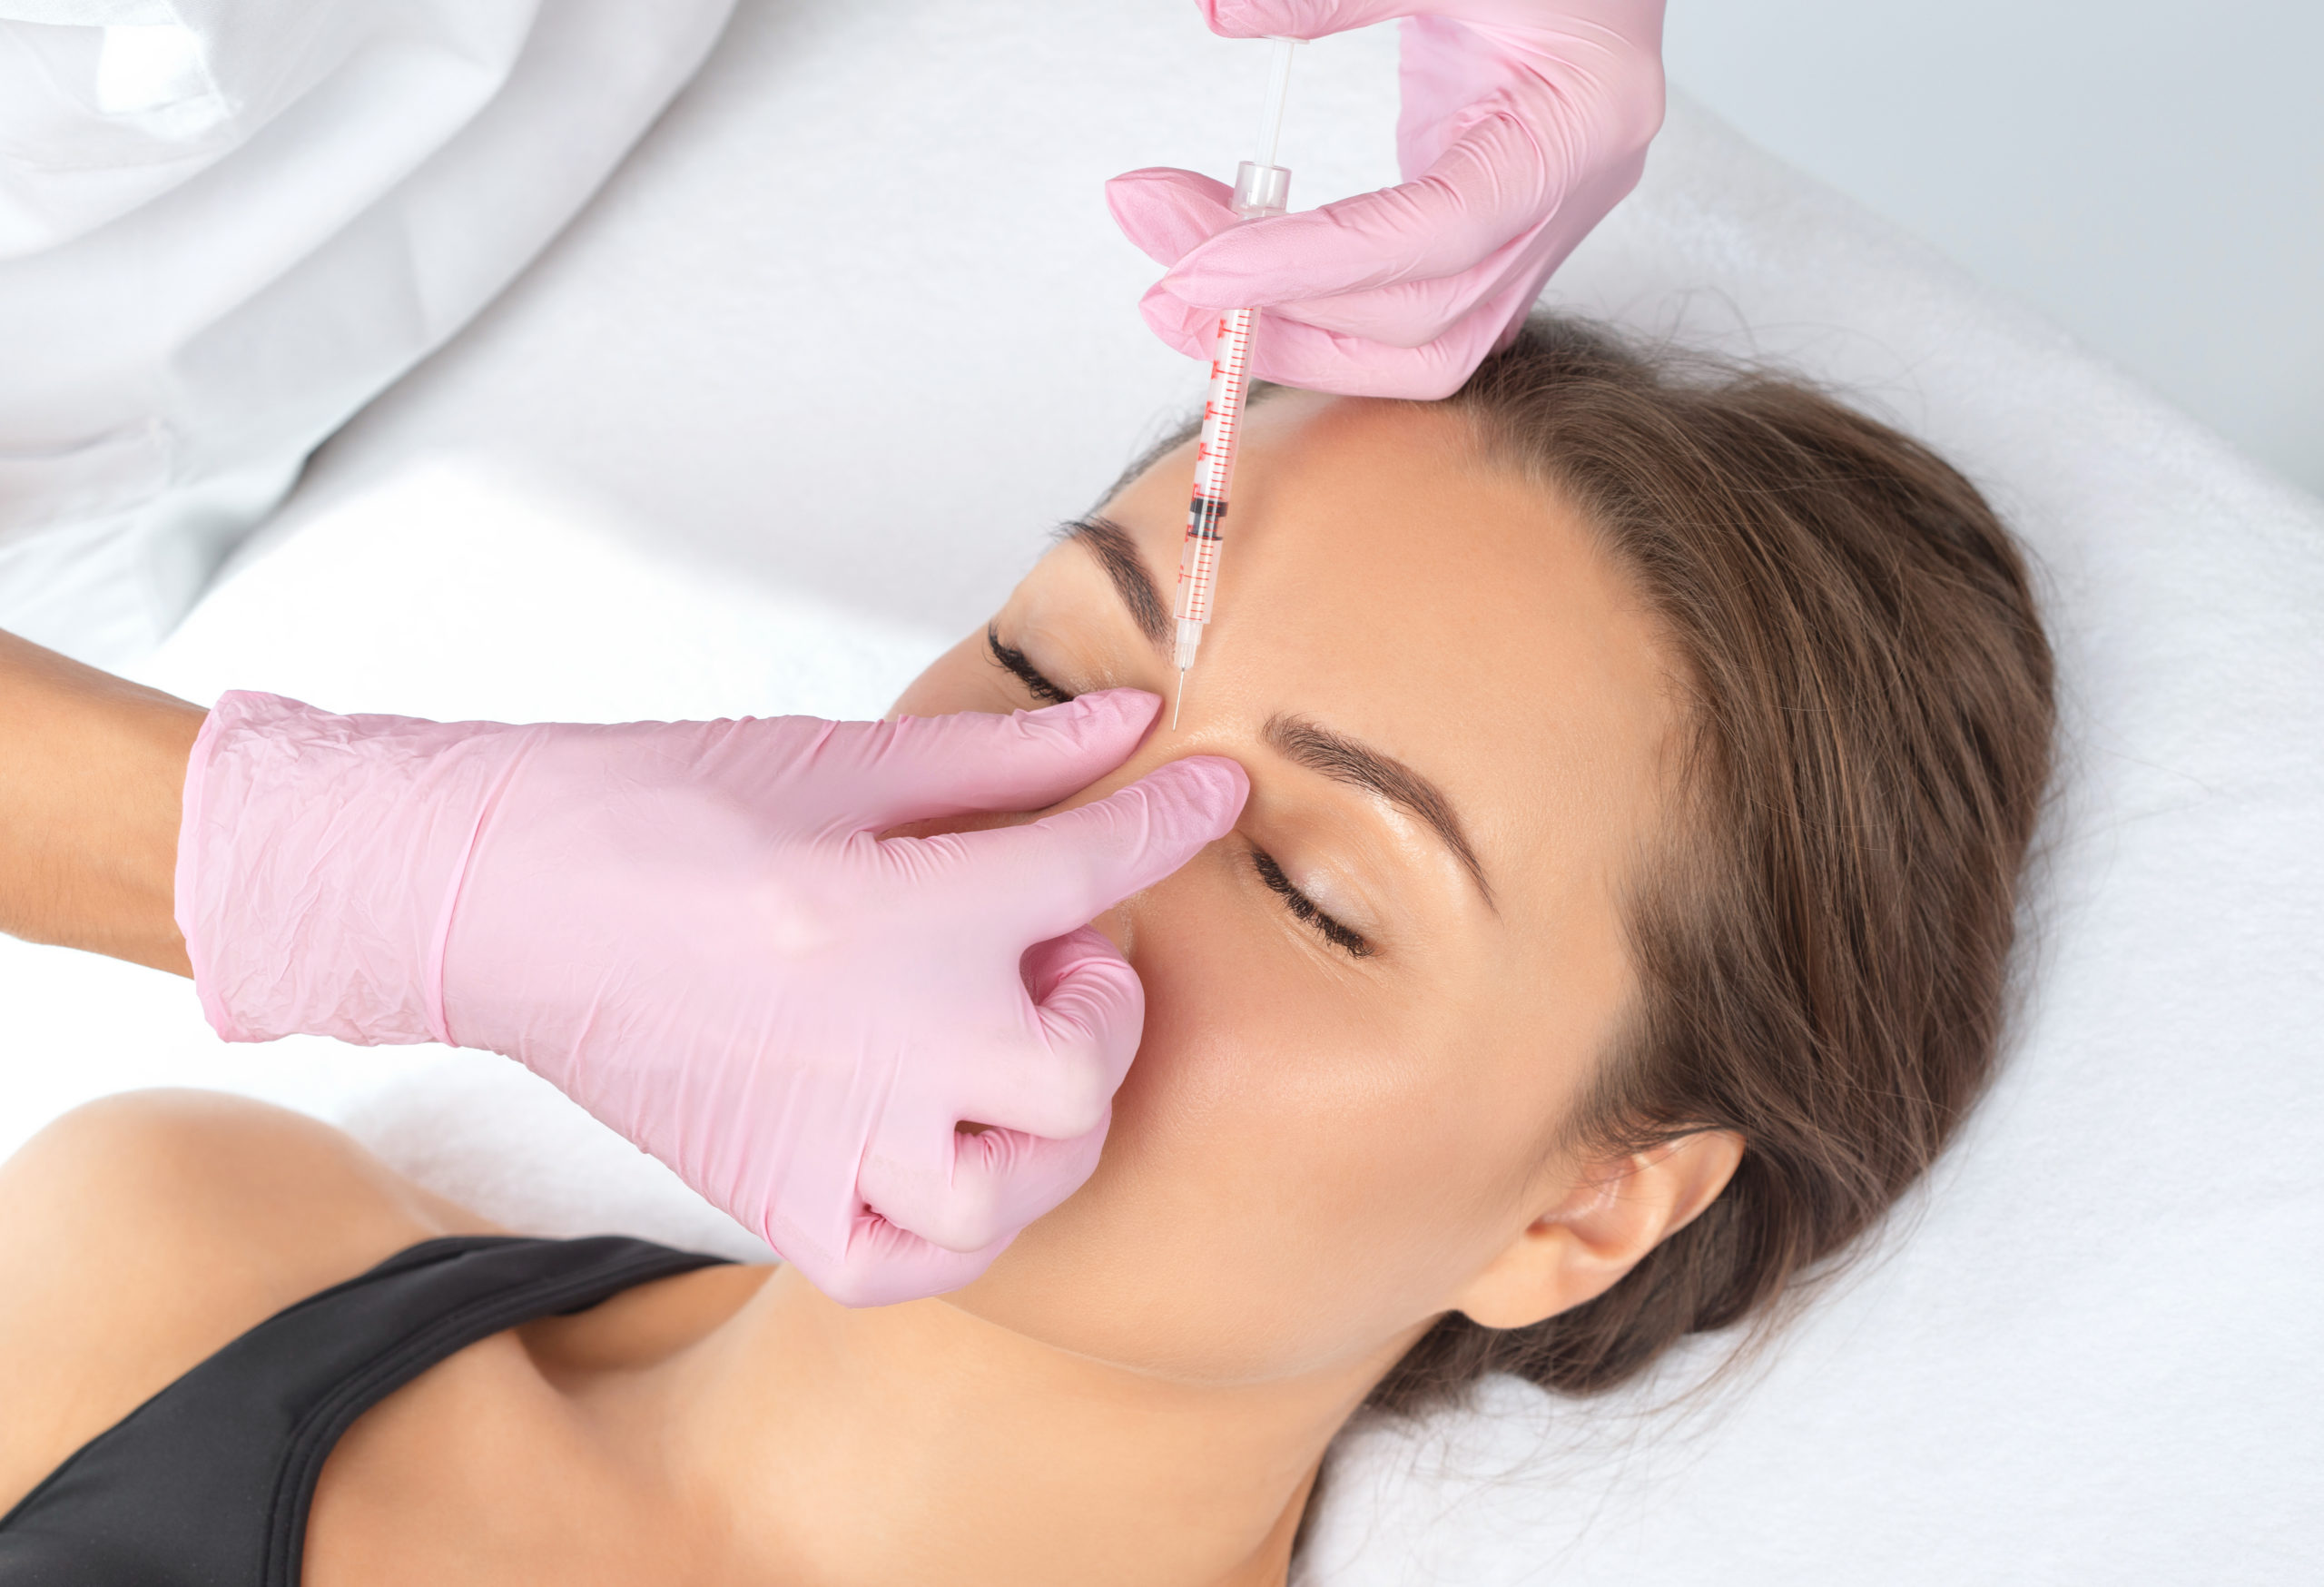 Rejuvenating anti wrinkle injections on the face of a beautiful woman | Skin Parlour in Pensacola, FL